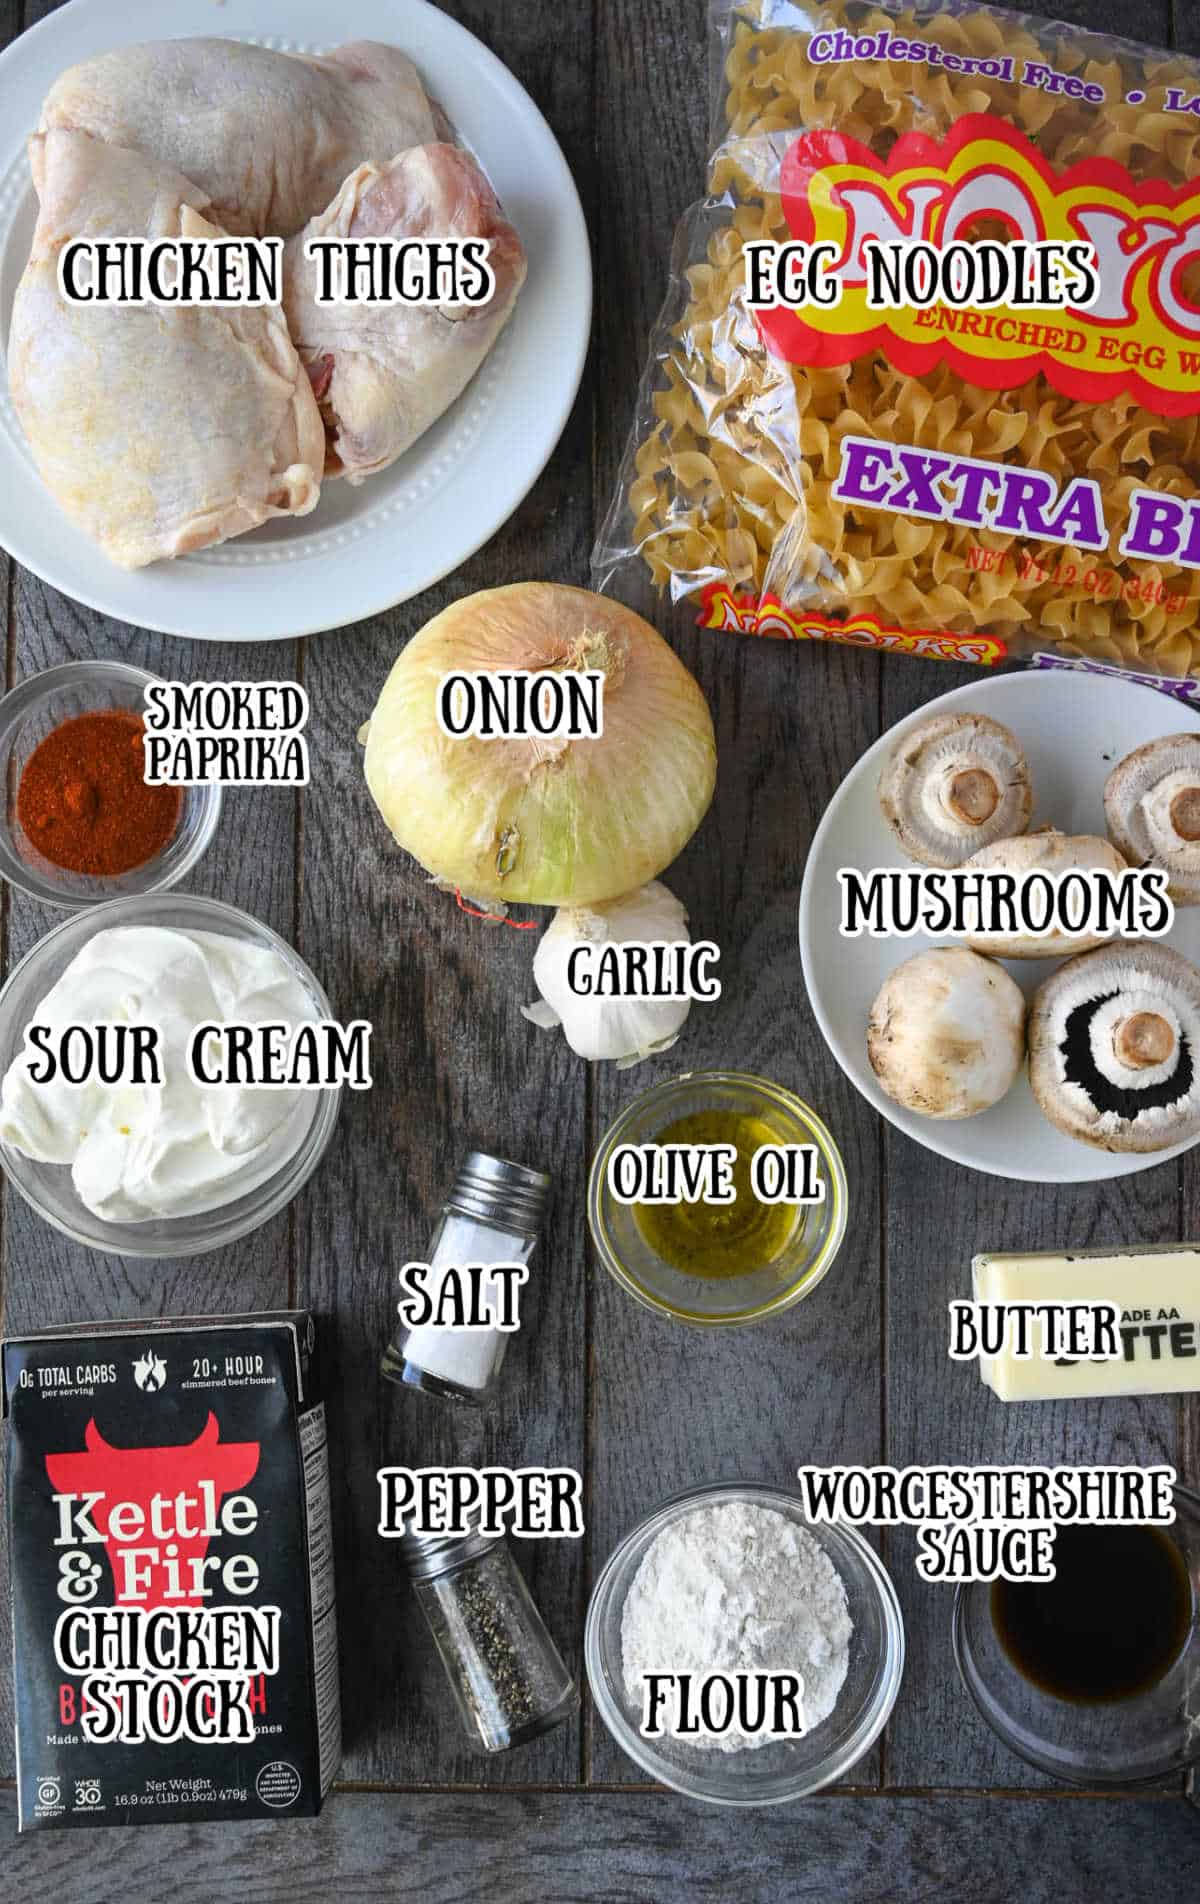 All the ingredients needed to make this recipe.